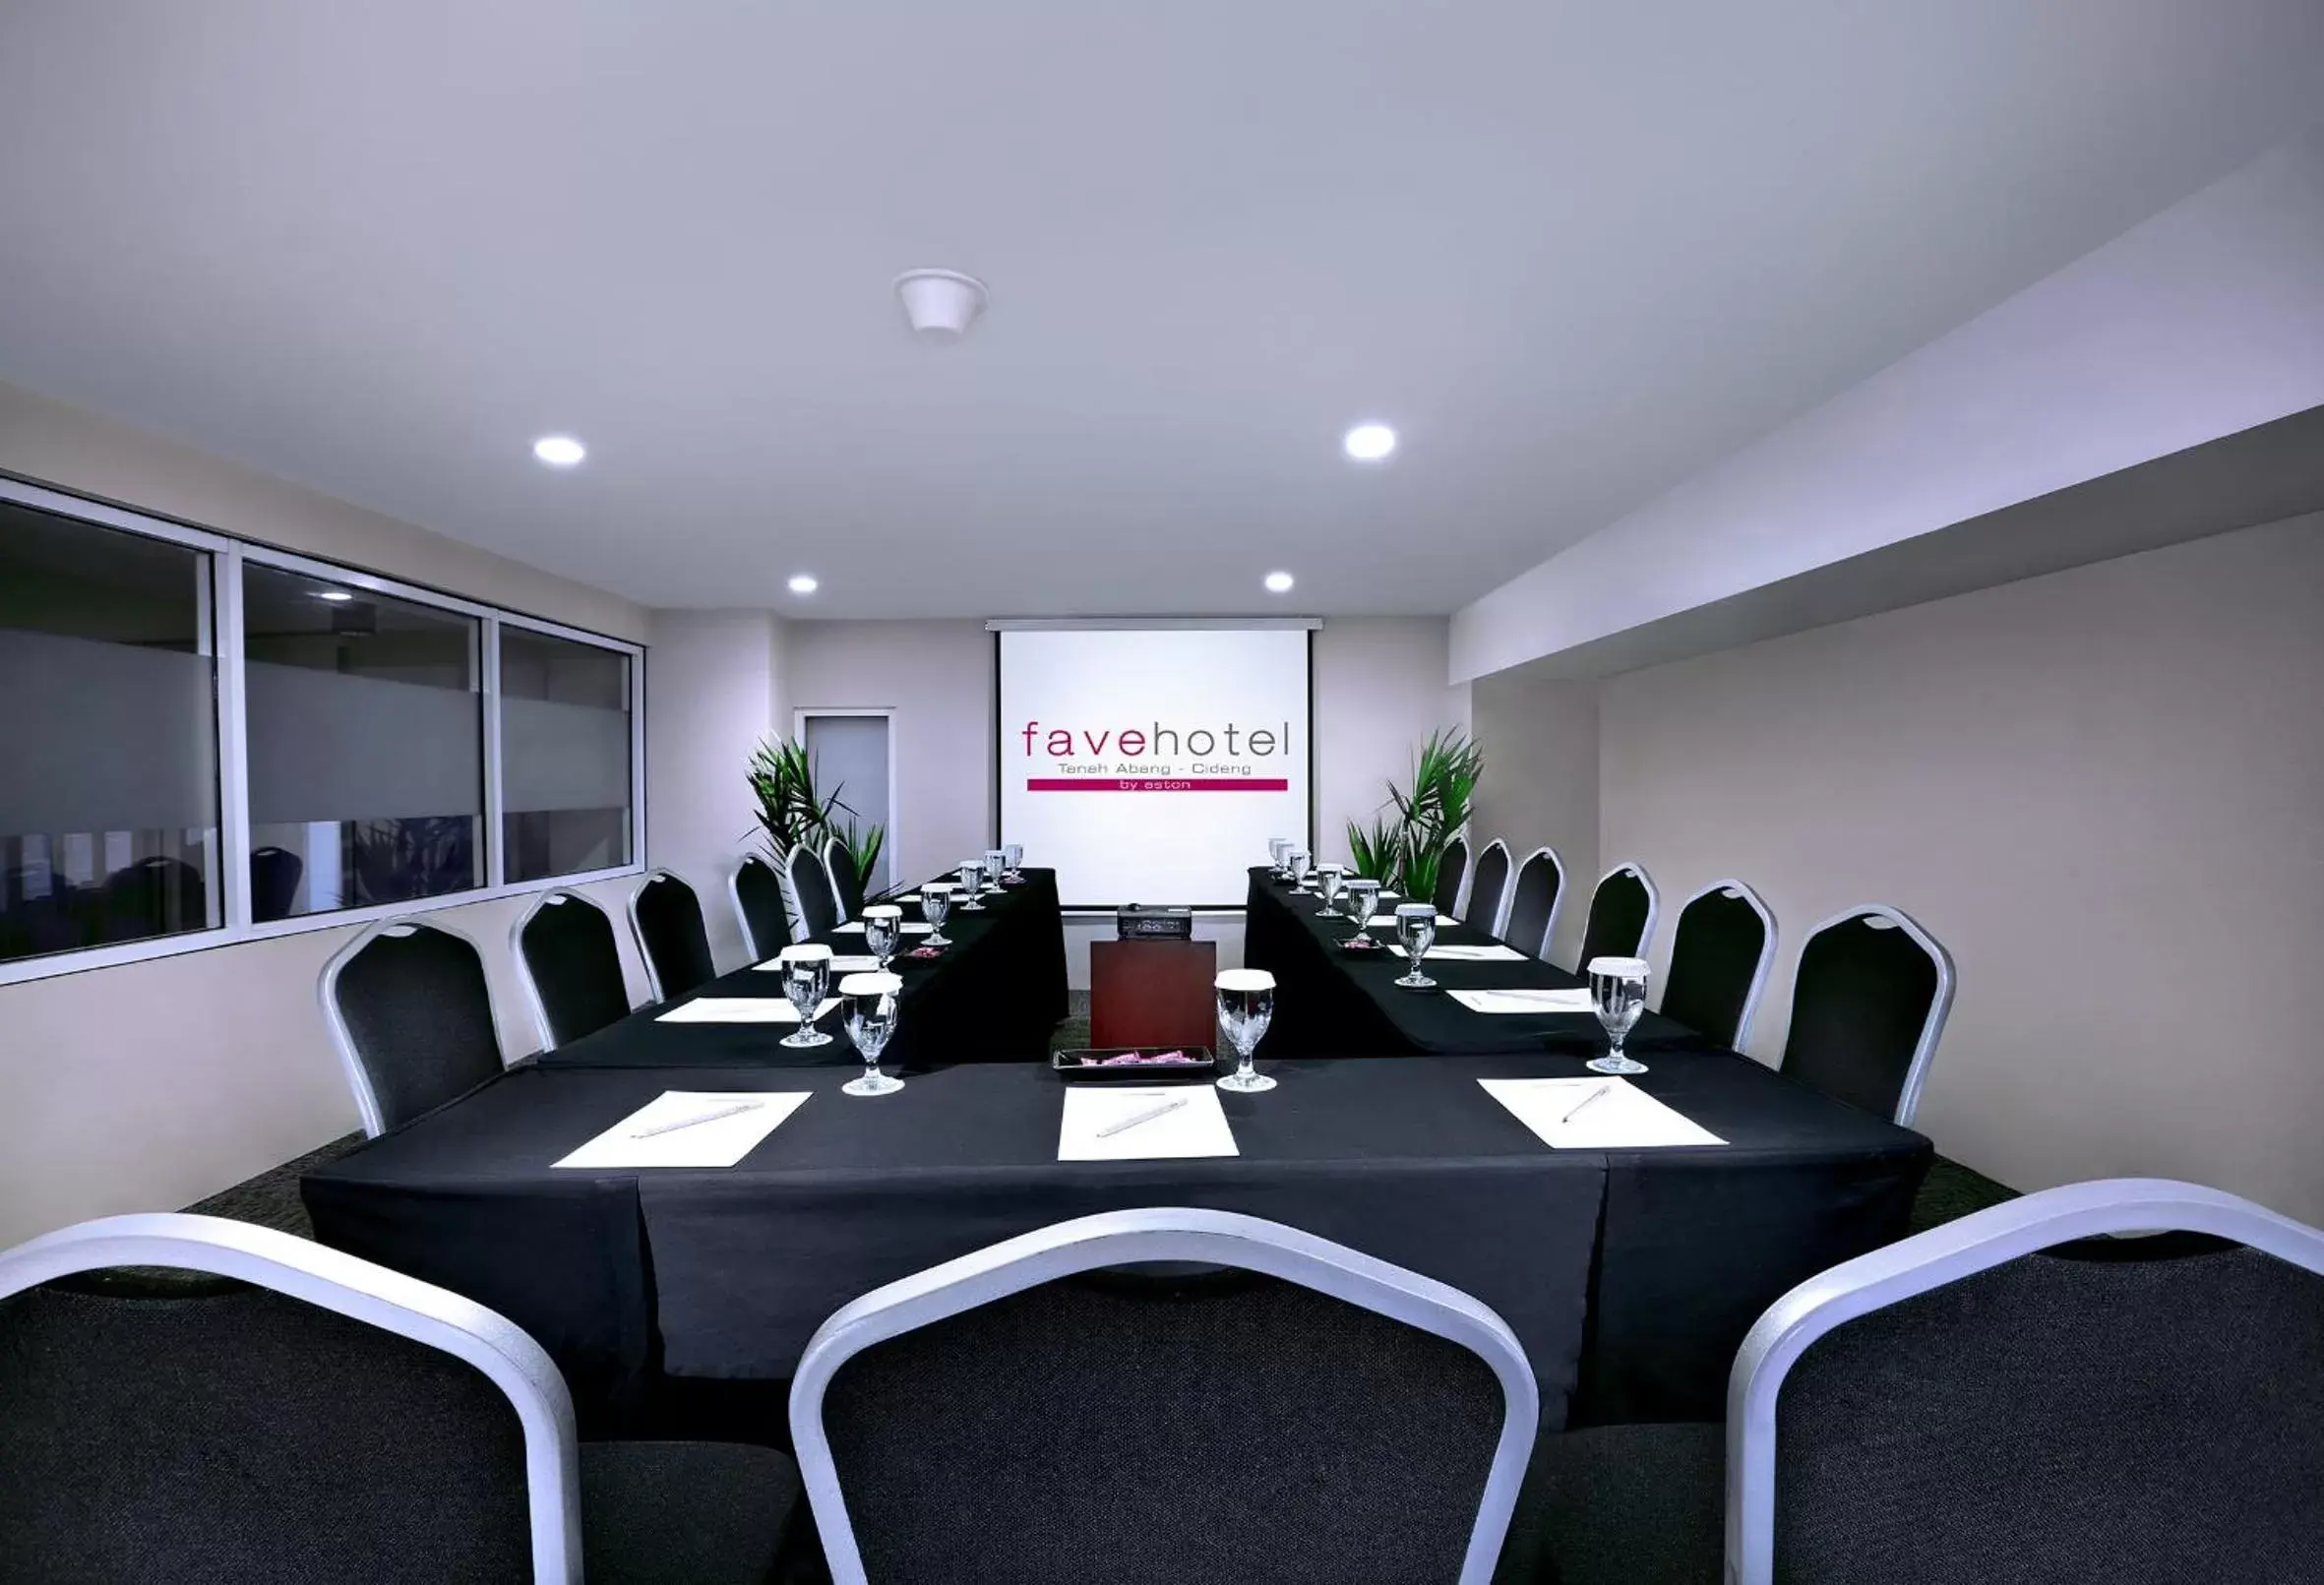 Meeting/conference room in favehotel Tanah Abang - Cideng